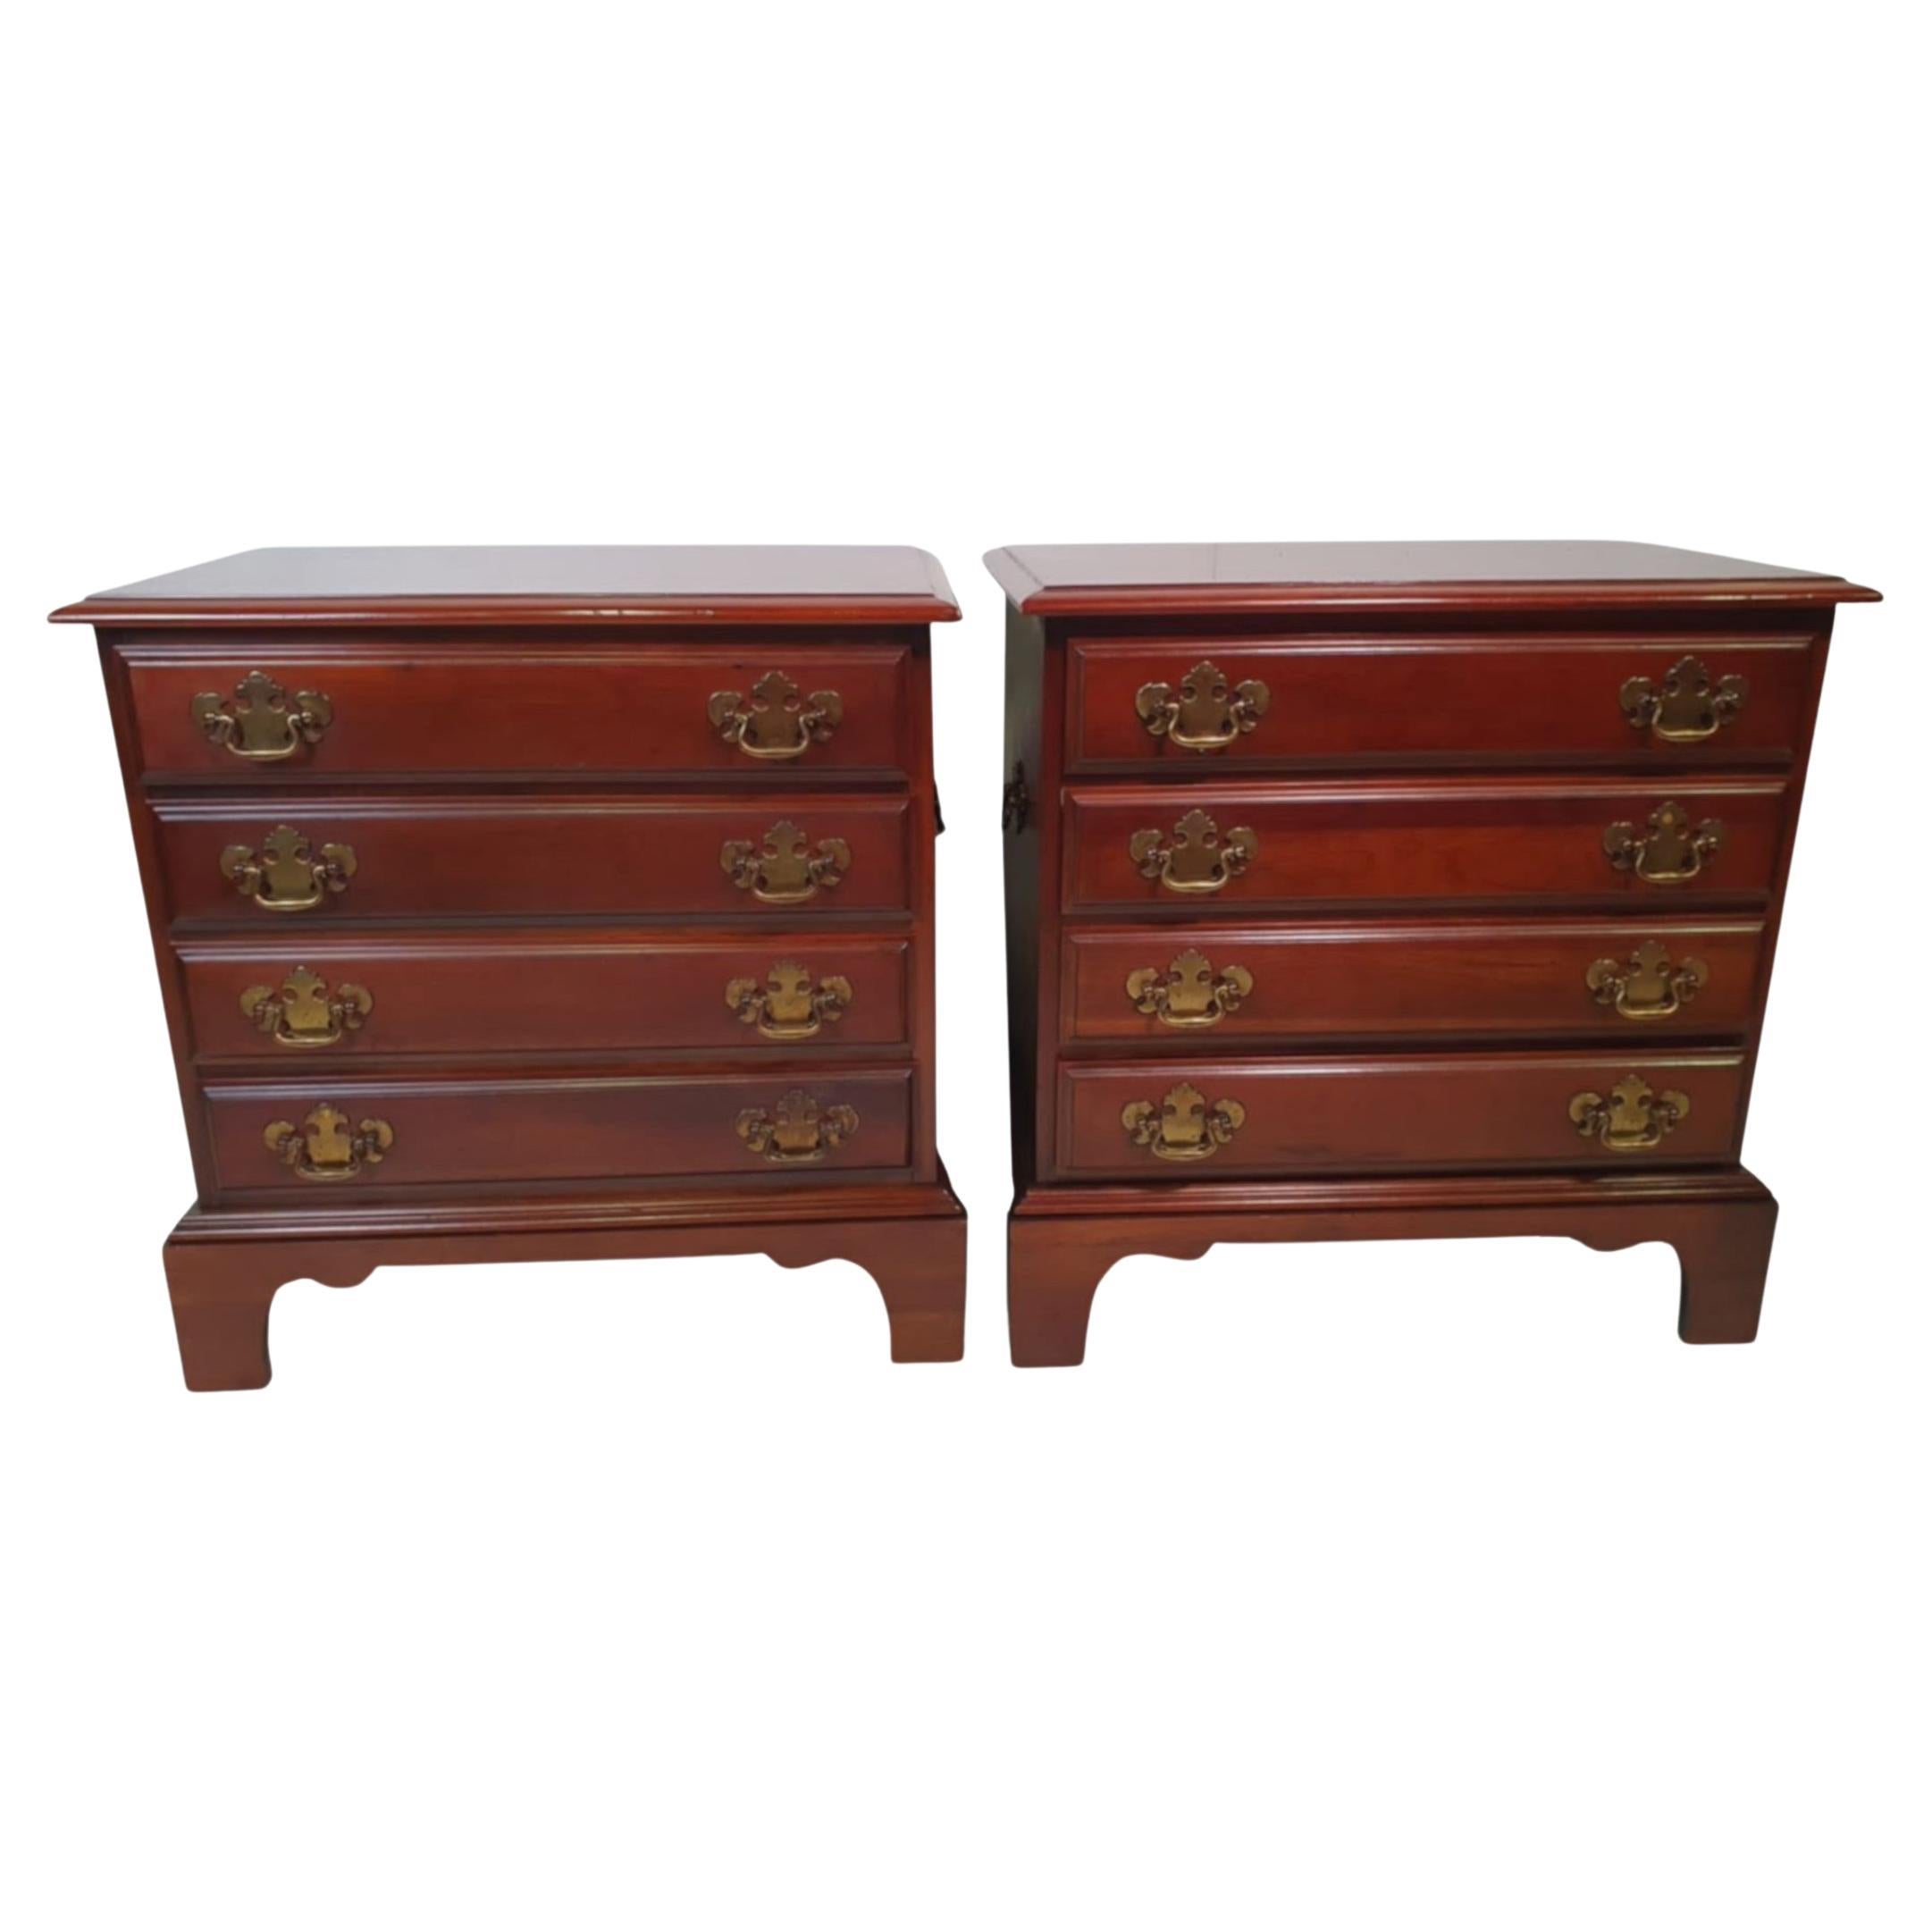 Gorgeous Pair of 20th Century Bedside Chests in the Georgian Manner